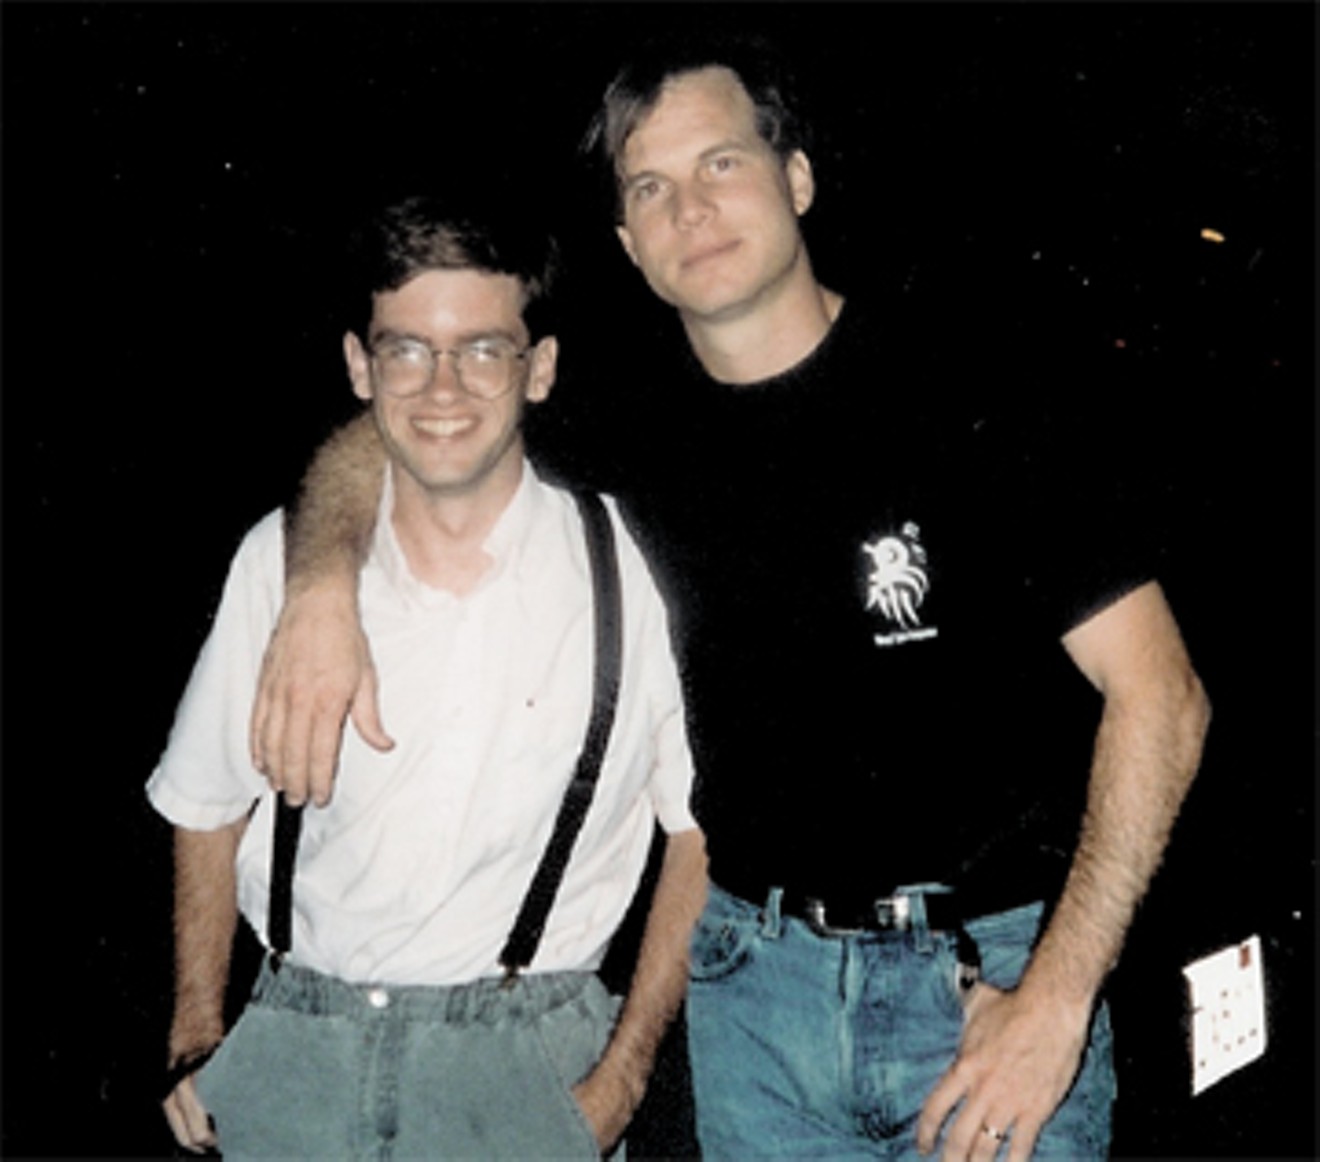 A young Todd Camp, left, poses for a picture with actor and Fort Worth native Bill Paxton, marking the start of a friendship that lasted more than 30 years.